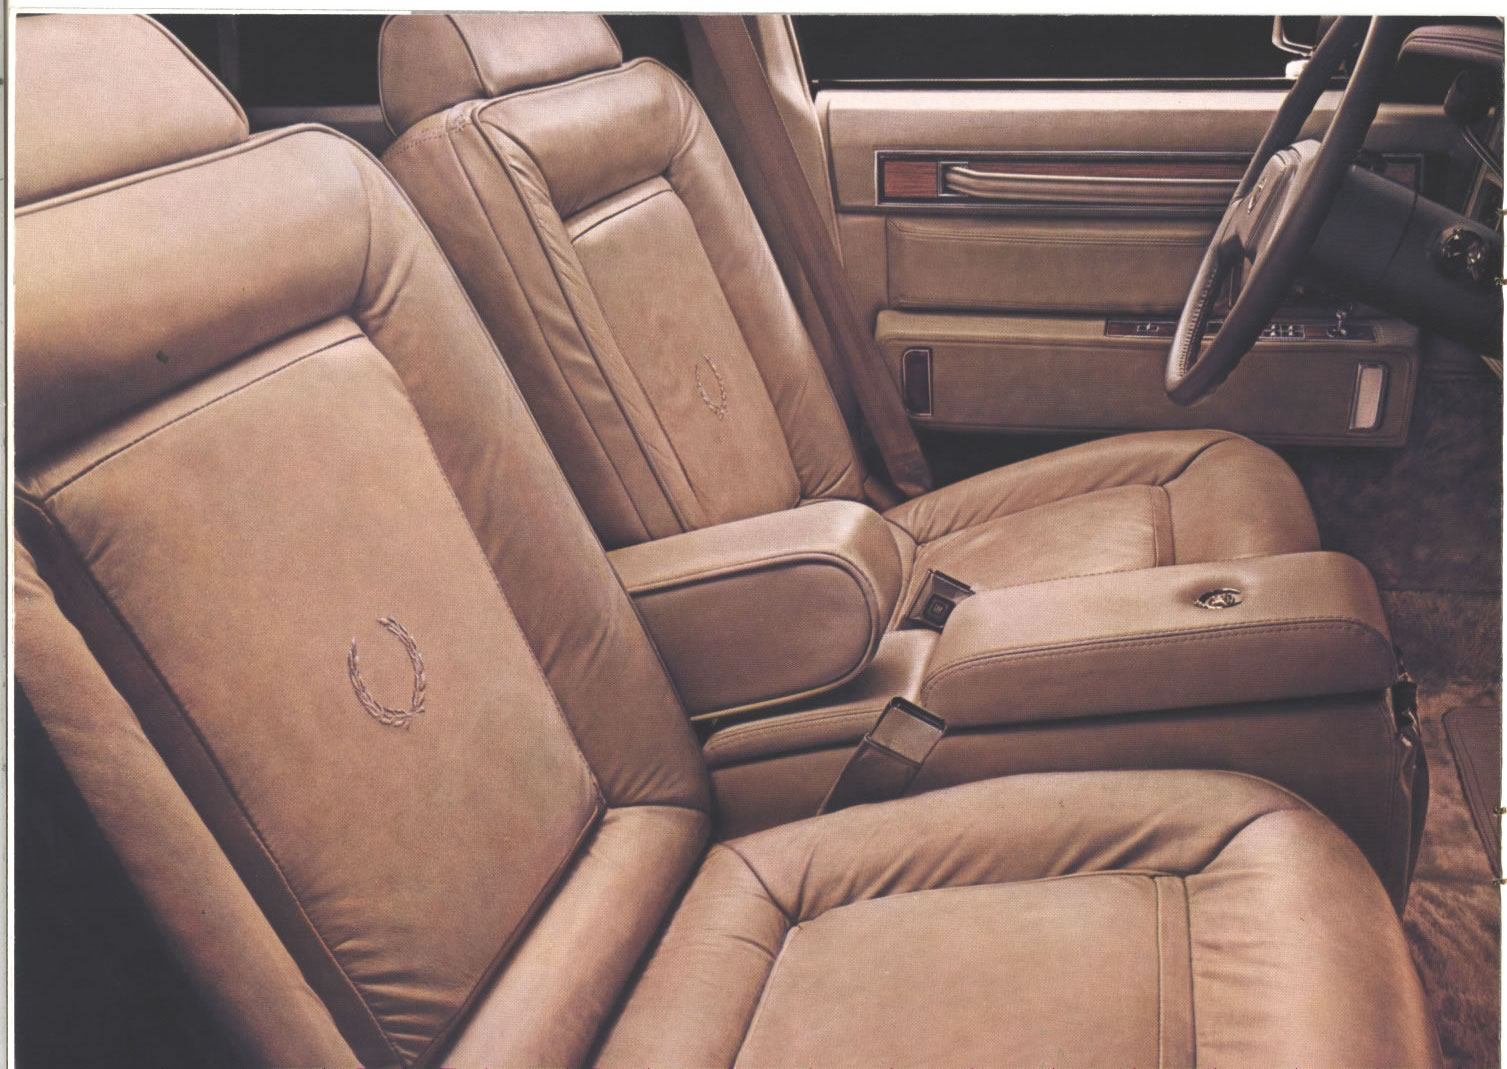 1980 Cadillac Preview Brochure Page 4